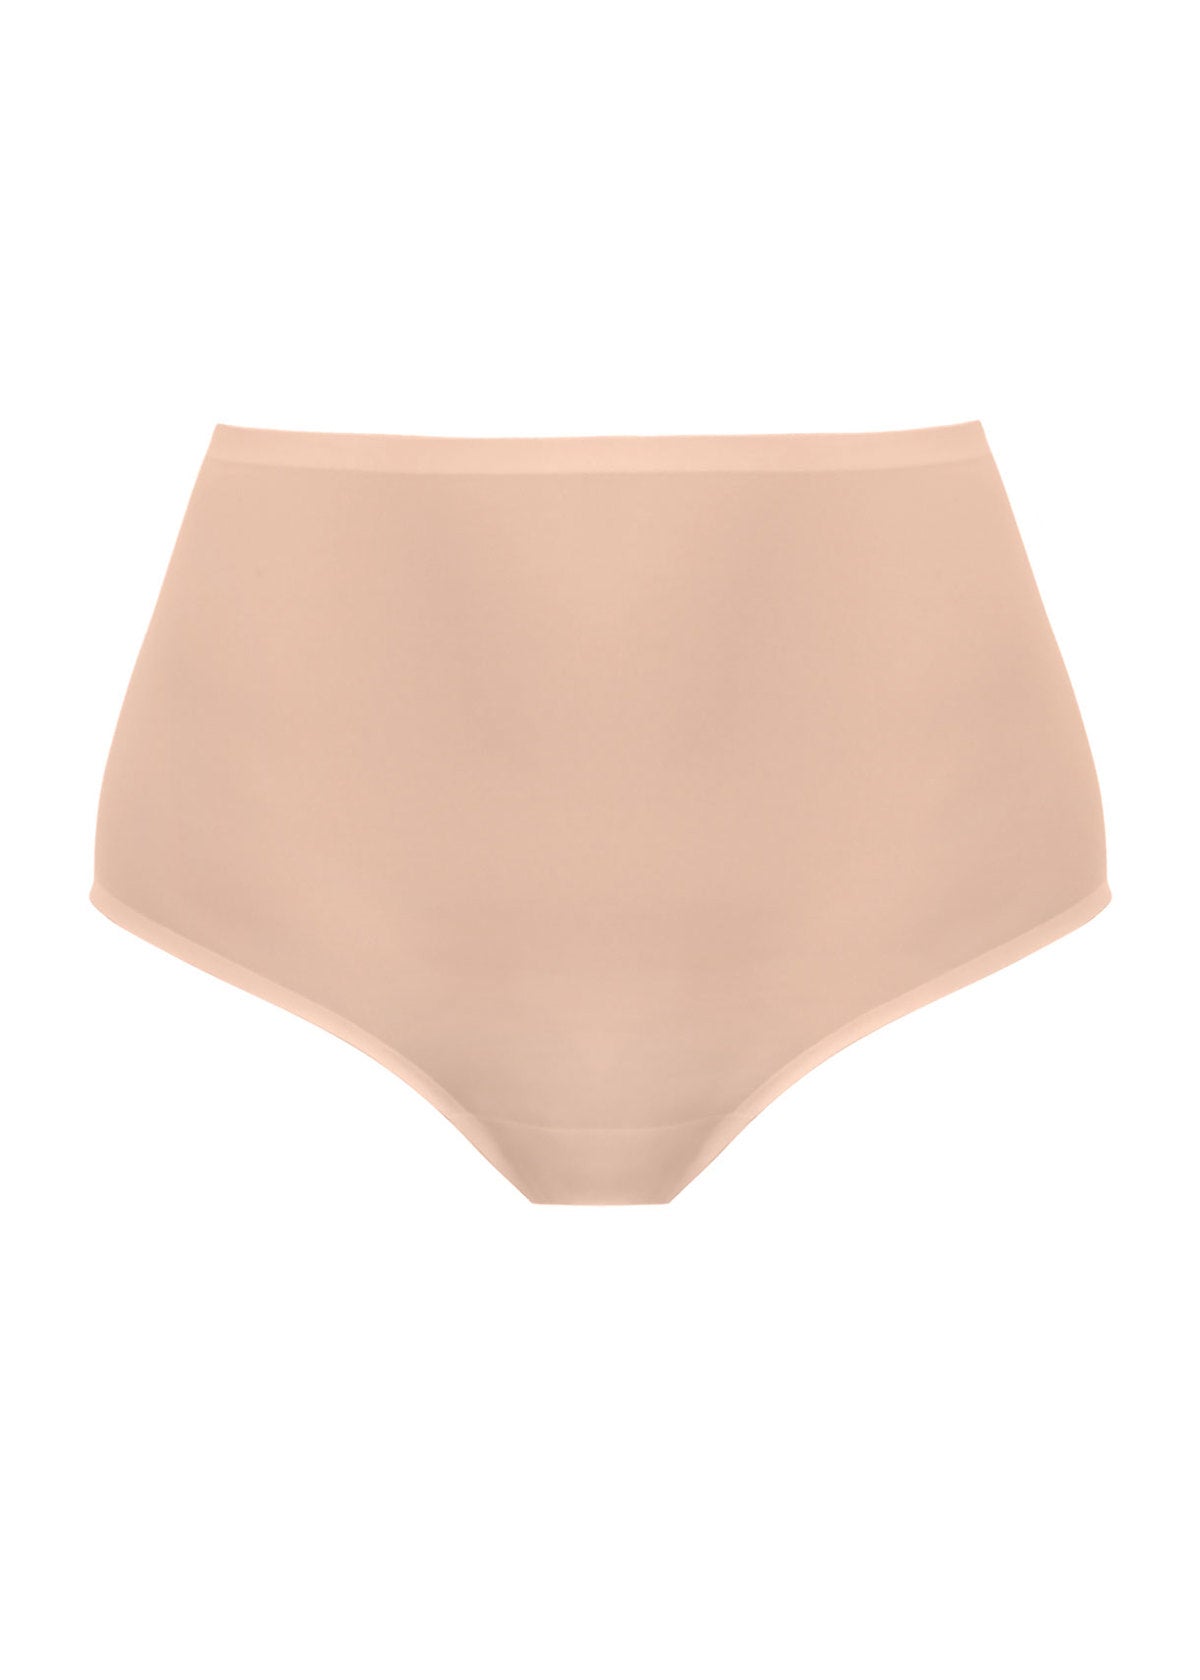 Fantasie Smoothease Invisible Stretch Full Brief - Beige 3 Shaws Department Stores